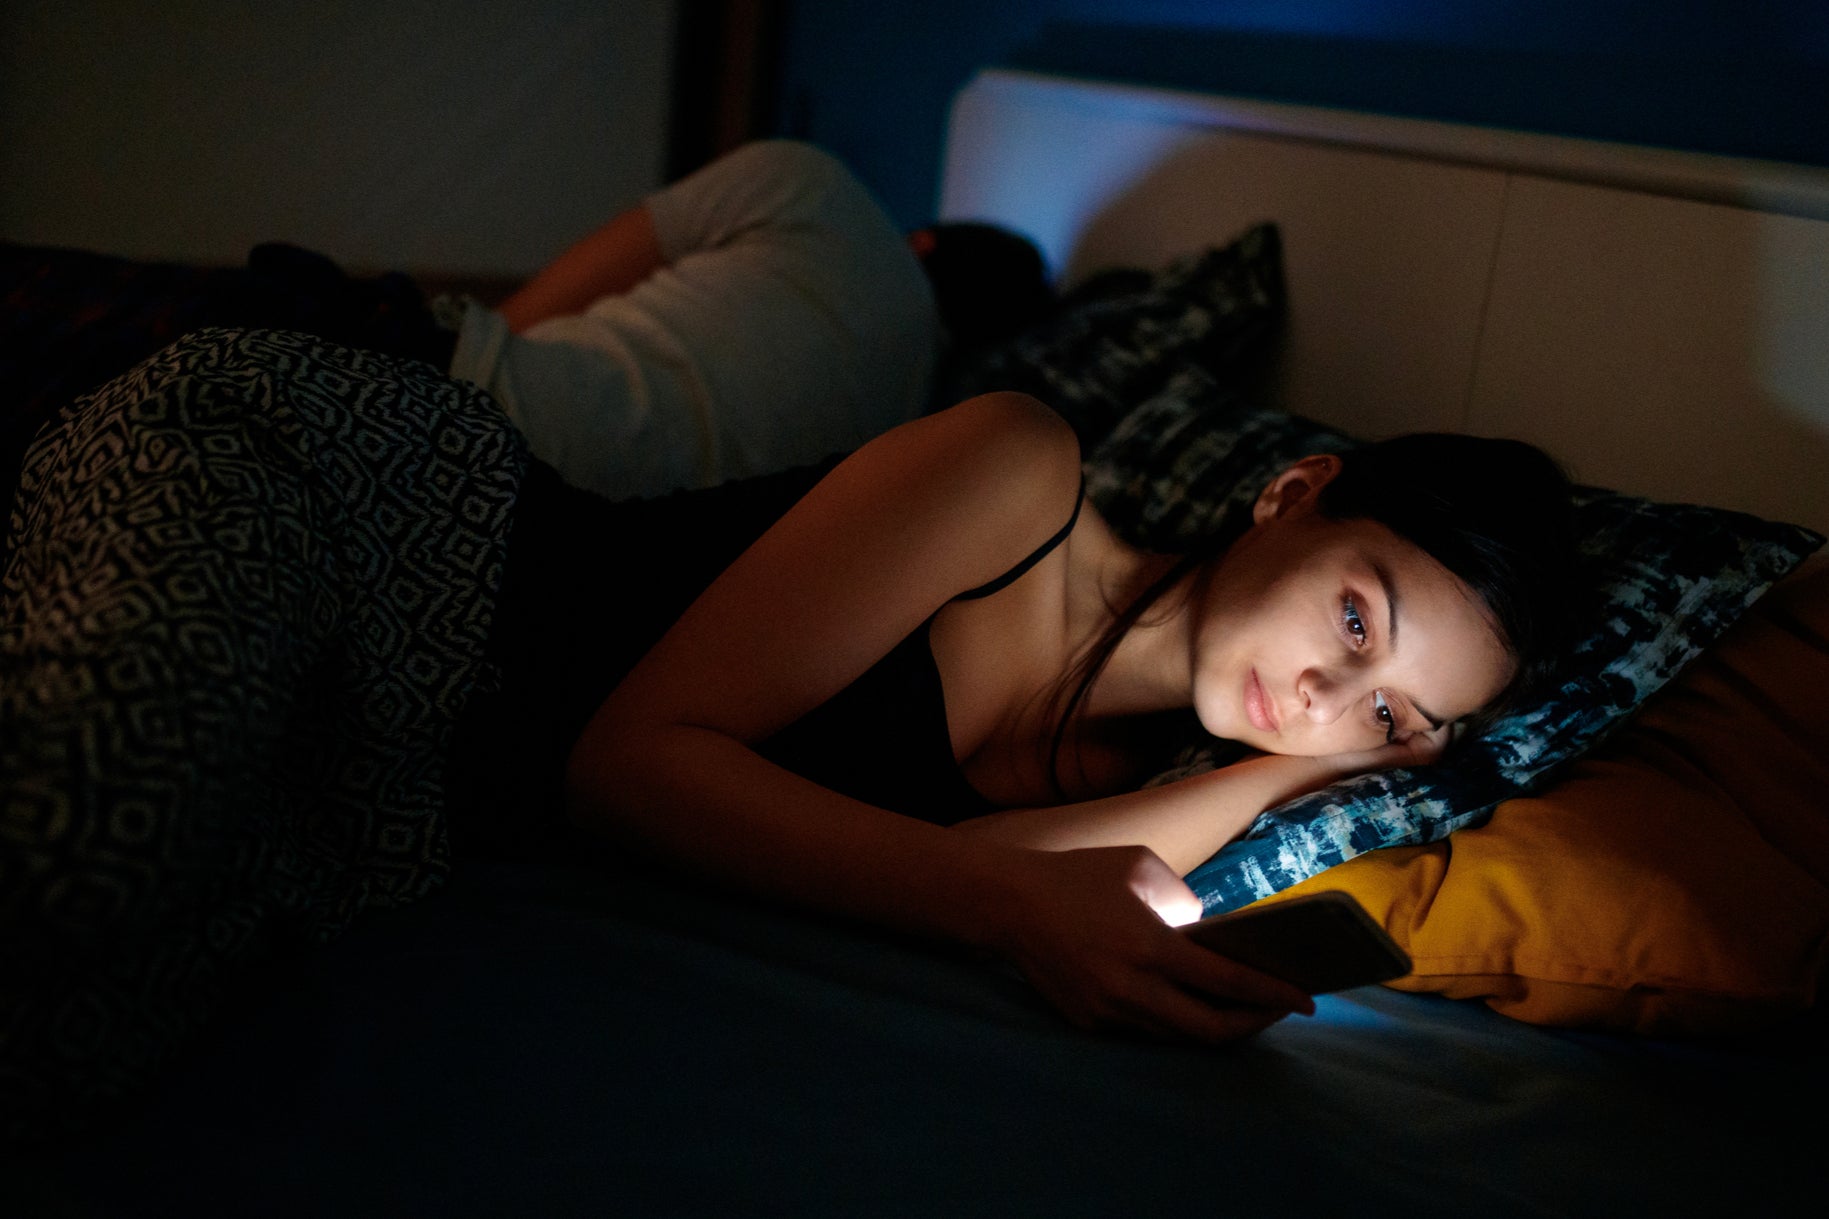 New report finds that screen time before bed is not as detrimental to sleep as previously believed